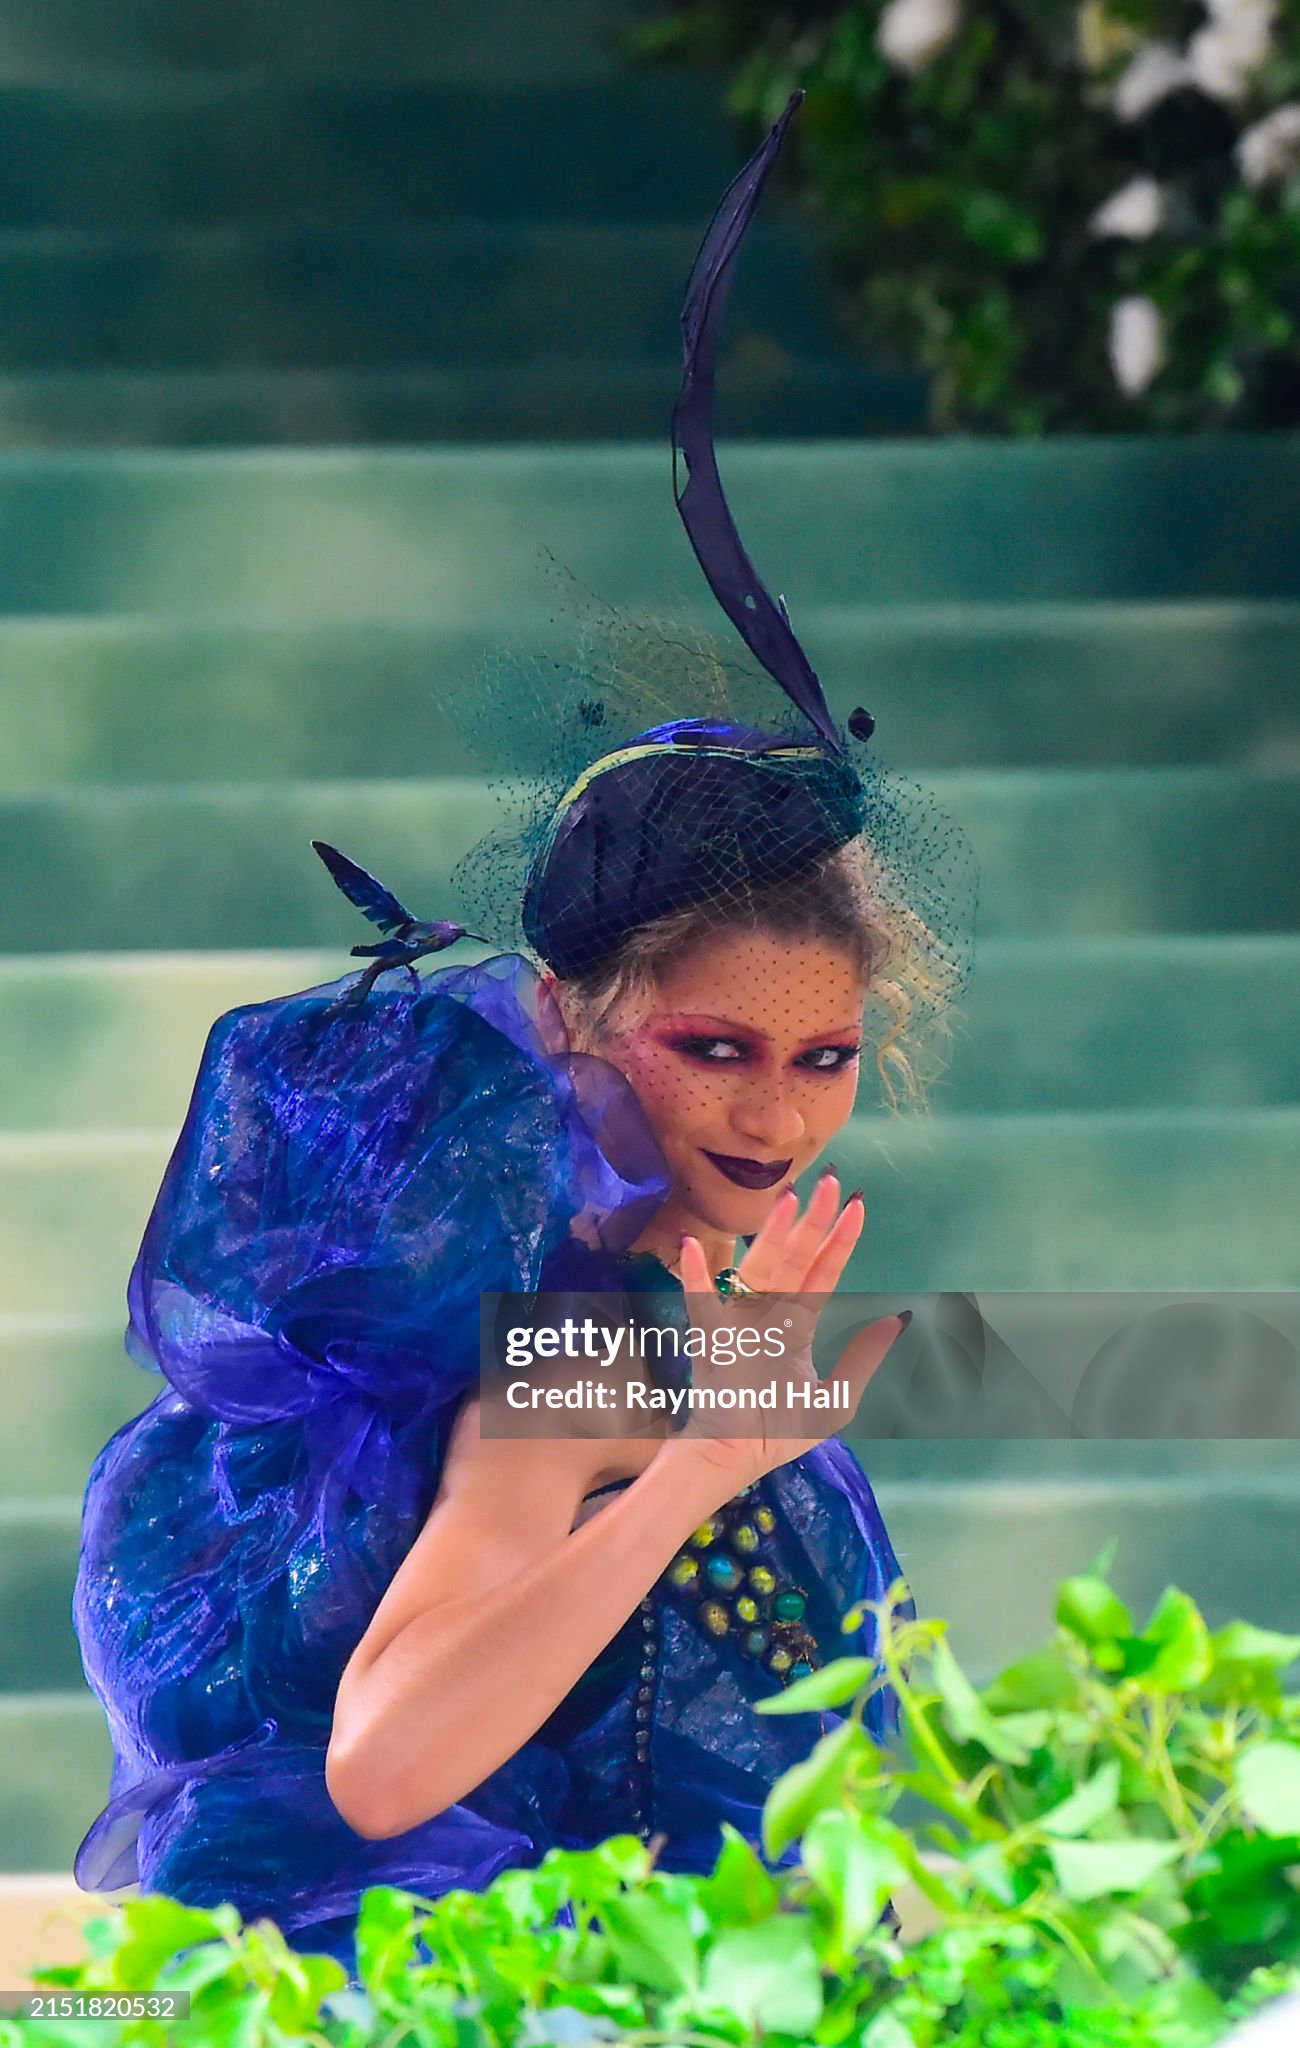 gettyimages-2151820532-2048x2048.jpg